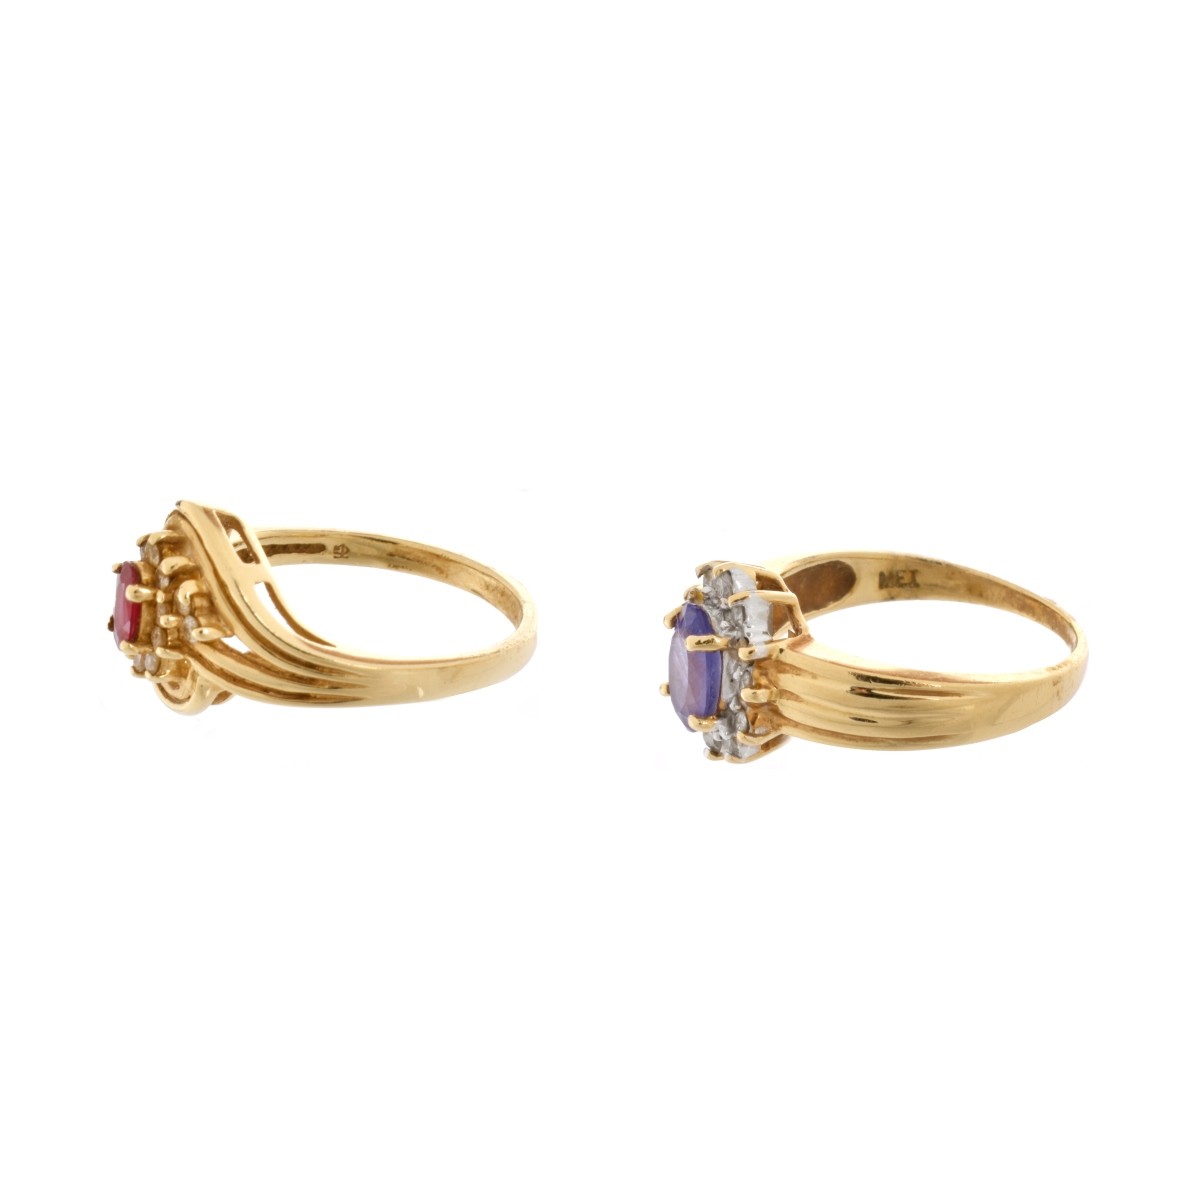 Two Gemstone and 14K Rings